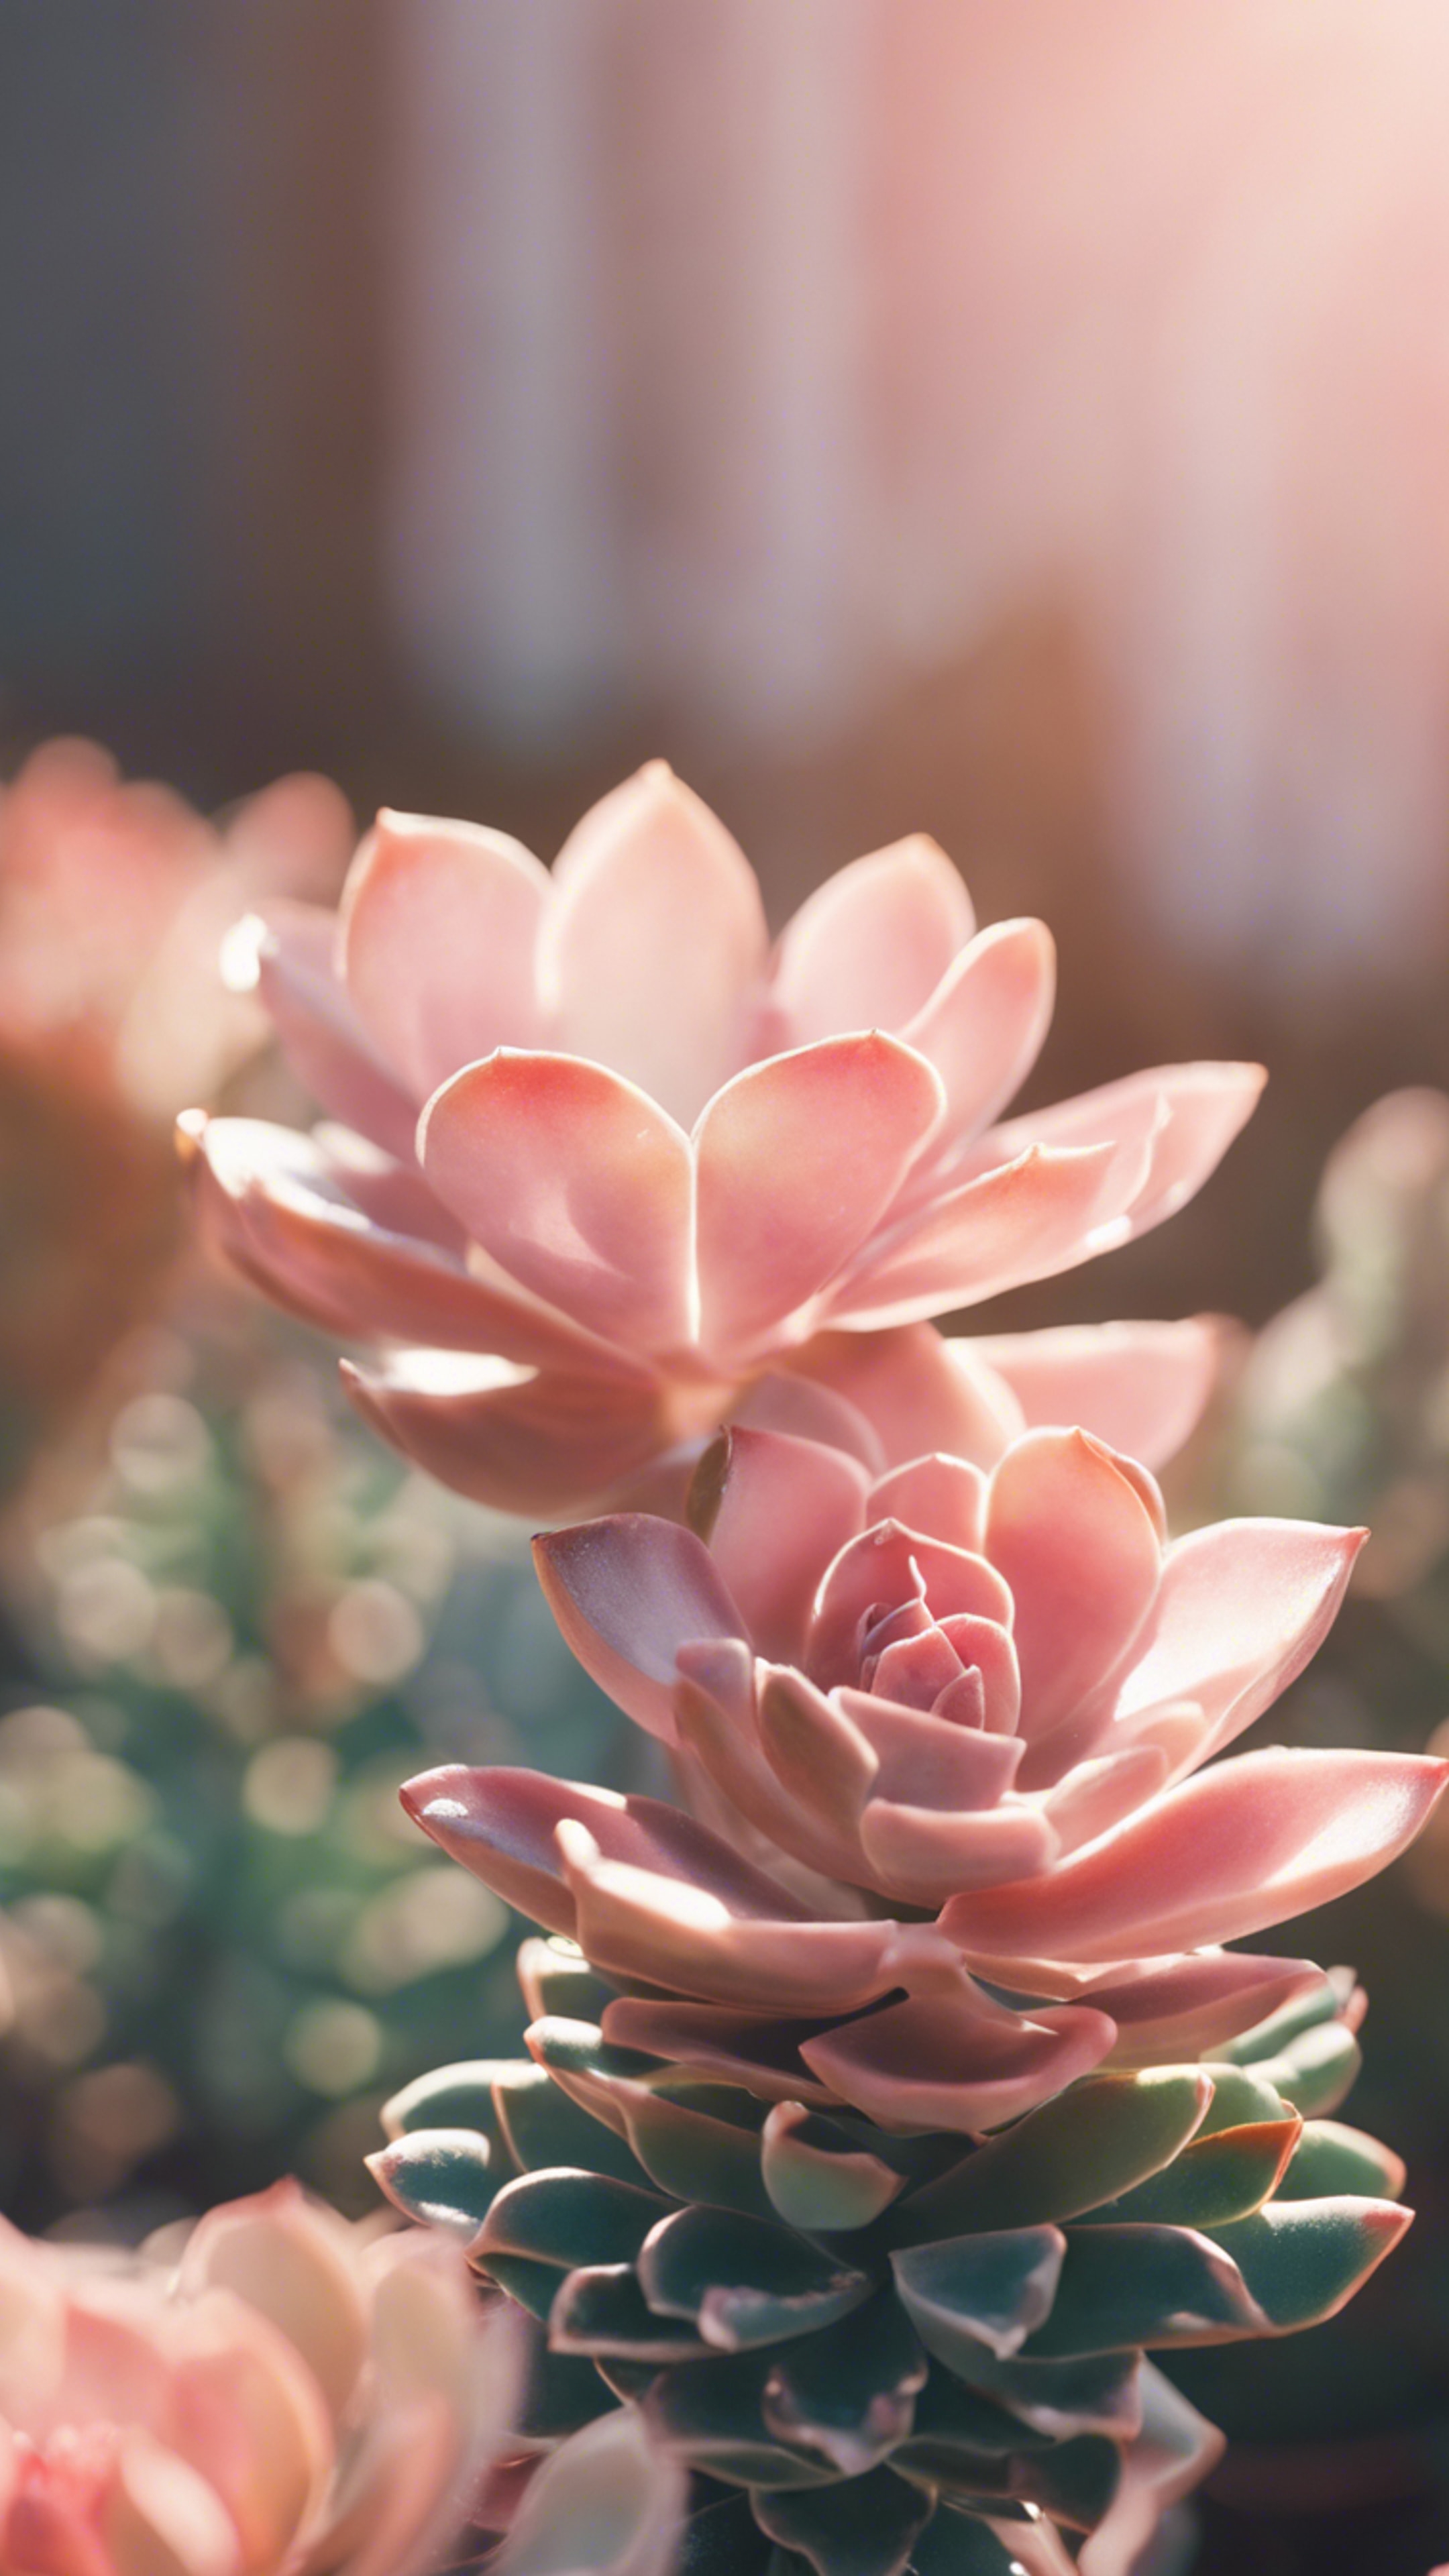 A close-up view of a preppy pastel pink succulent plant bathed in gentle morning sunshine. 벽지[96679d4148894c129b05]